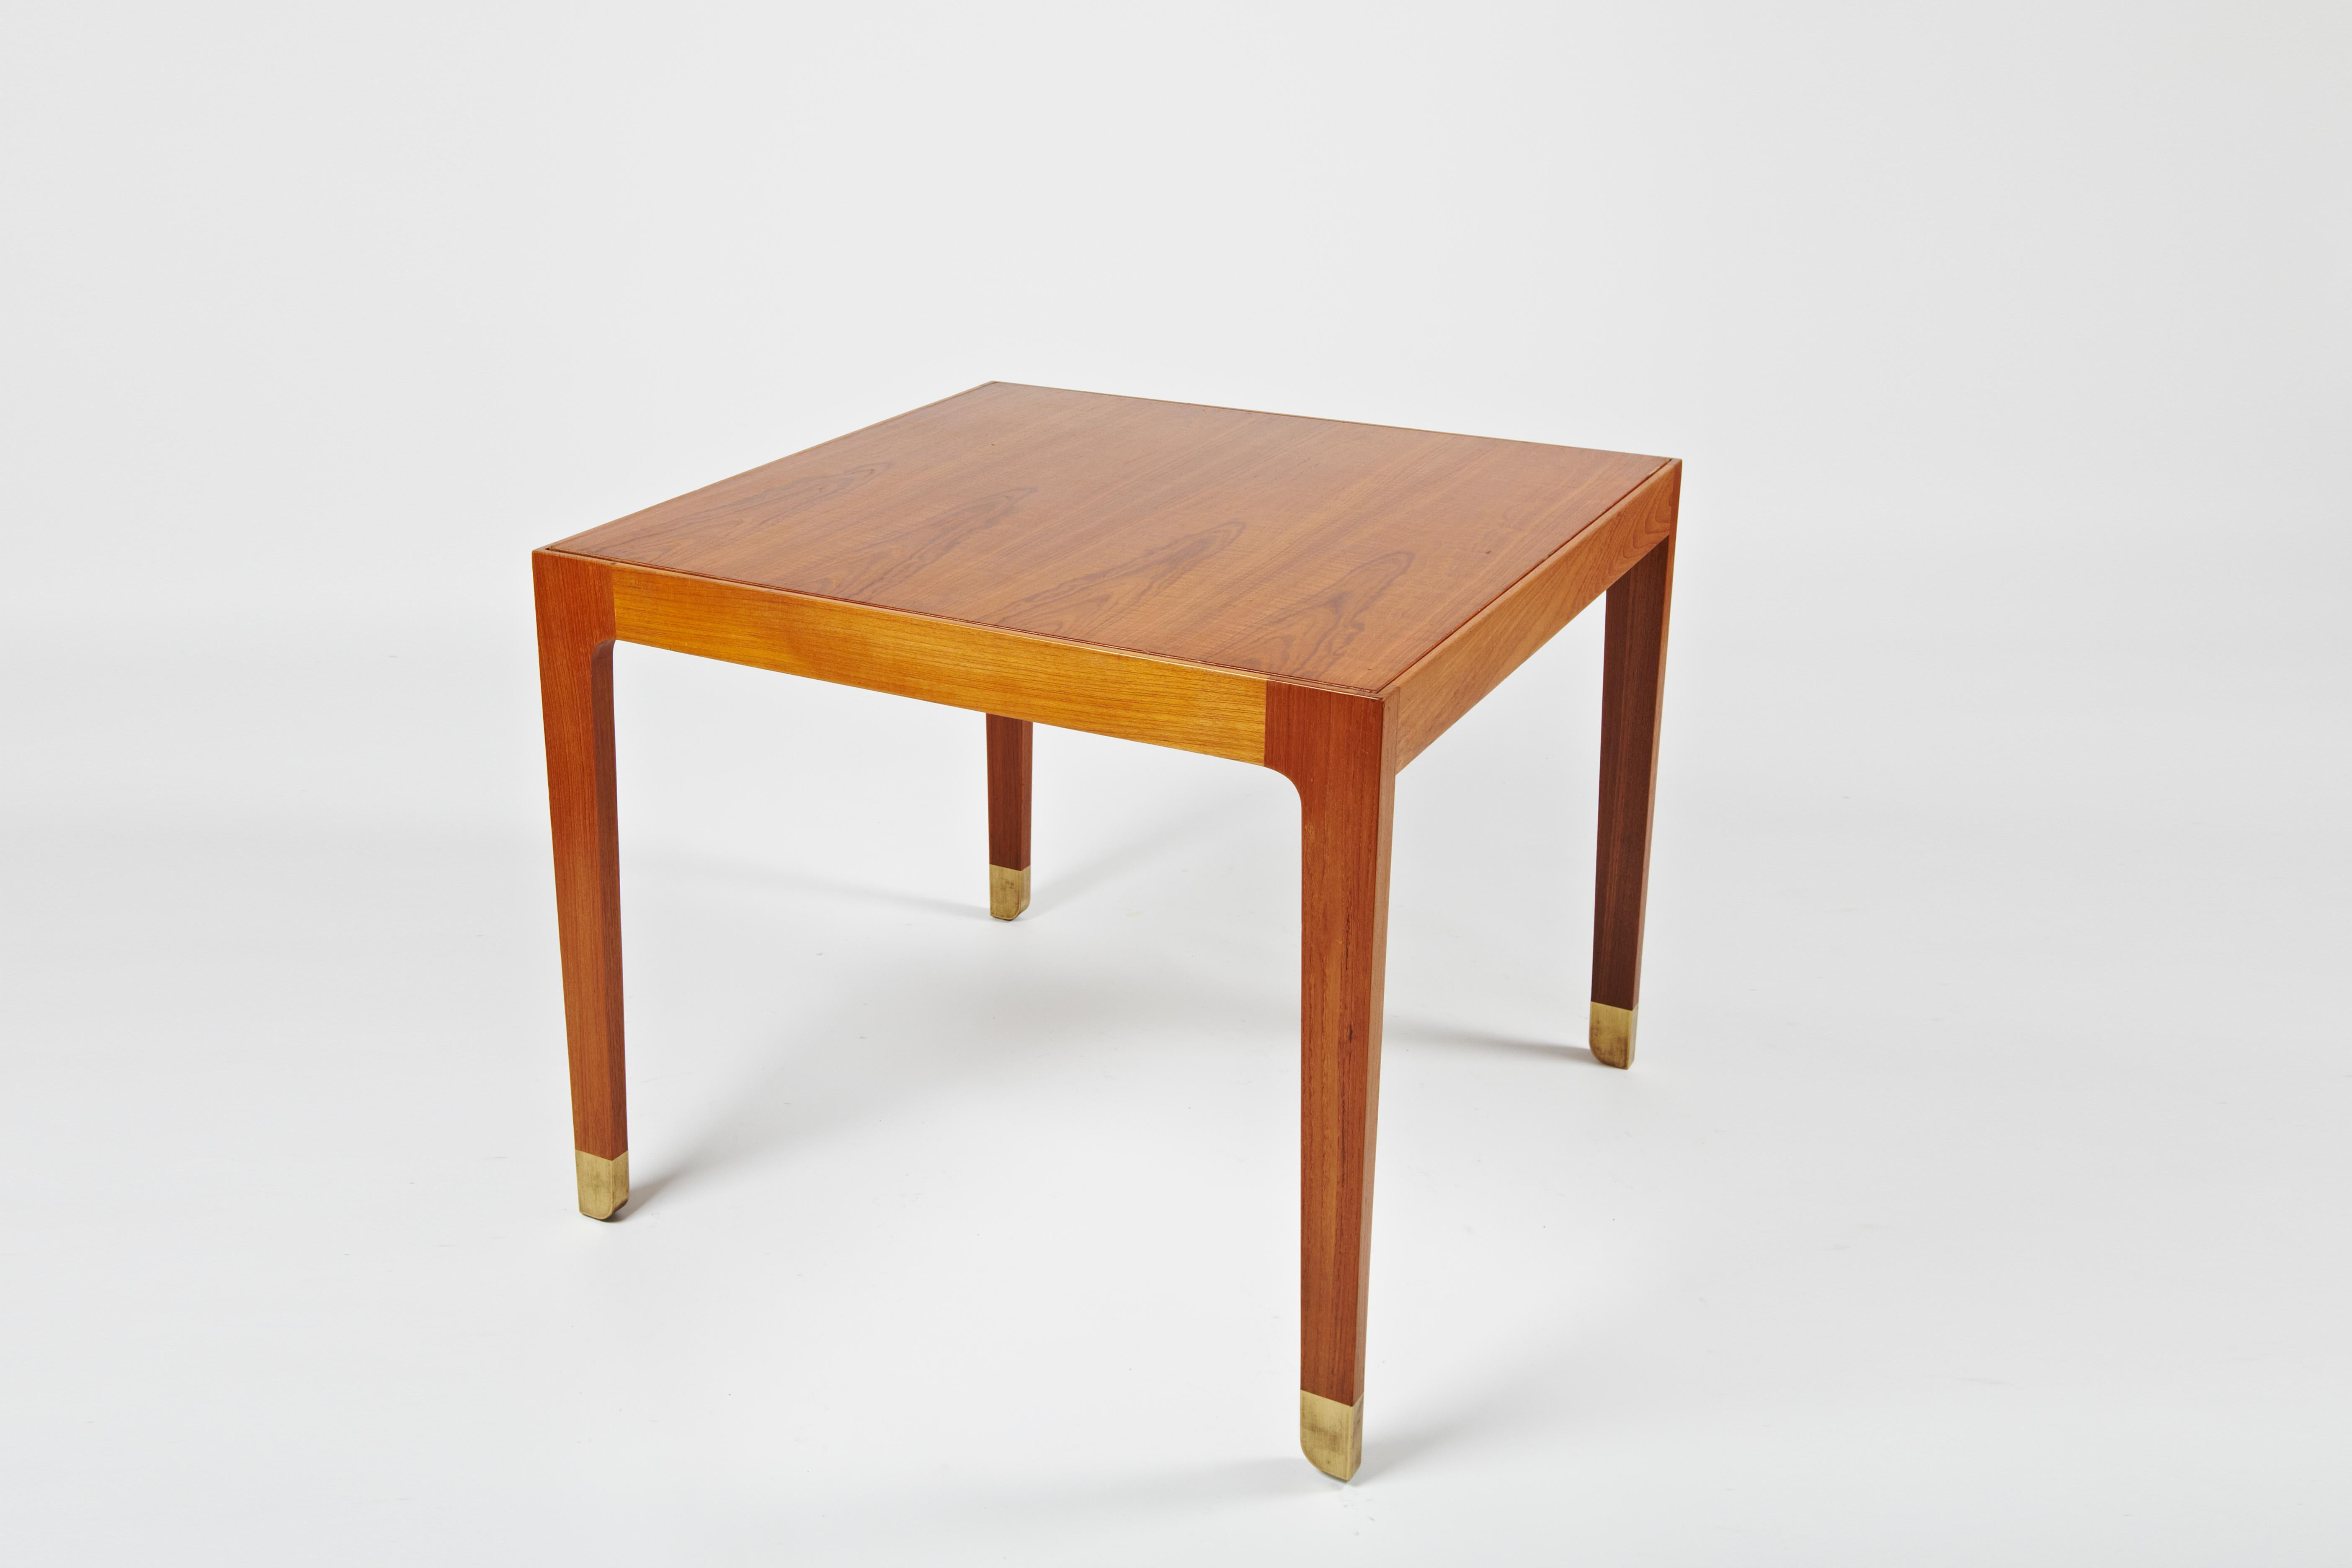 Finn Juhl:  Exhibition tables made 1947 - for dining or cards - single or pair For Sale 3